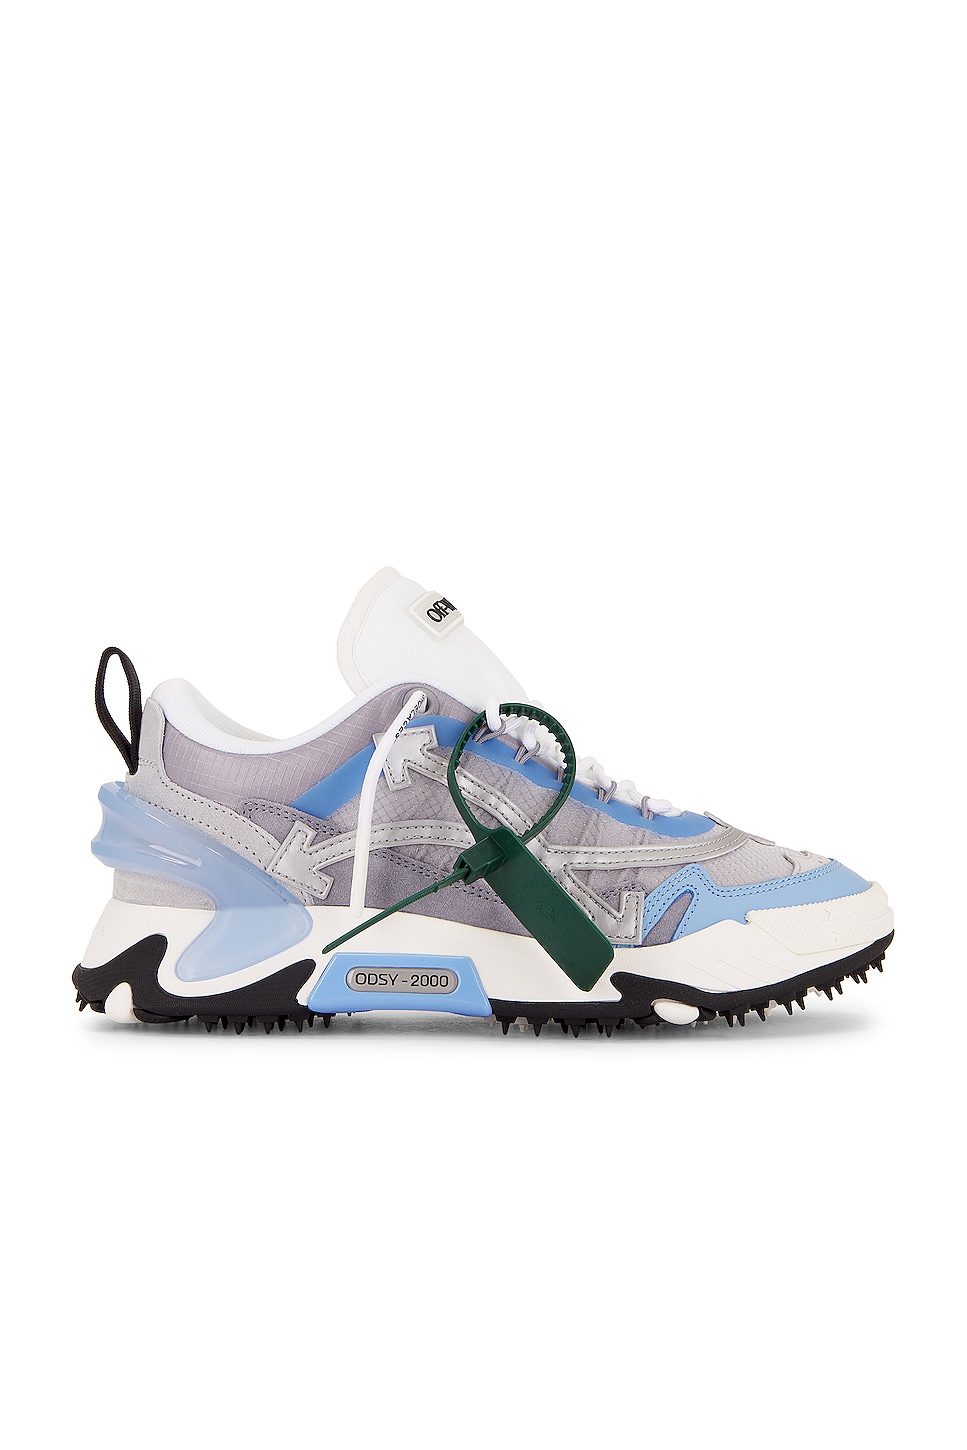 Image 1 of OFF-WHITE Odsy 2000 Sneaker in White, Light, & Blue